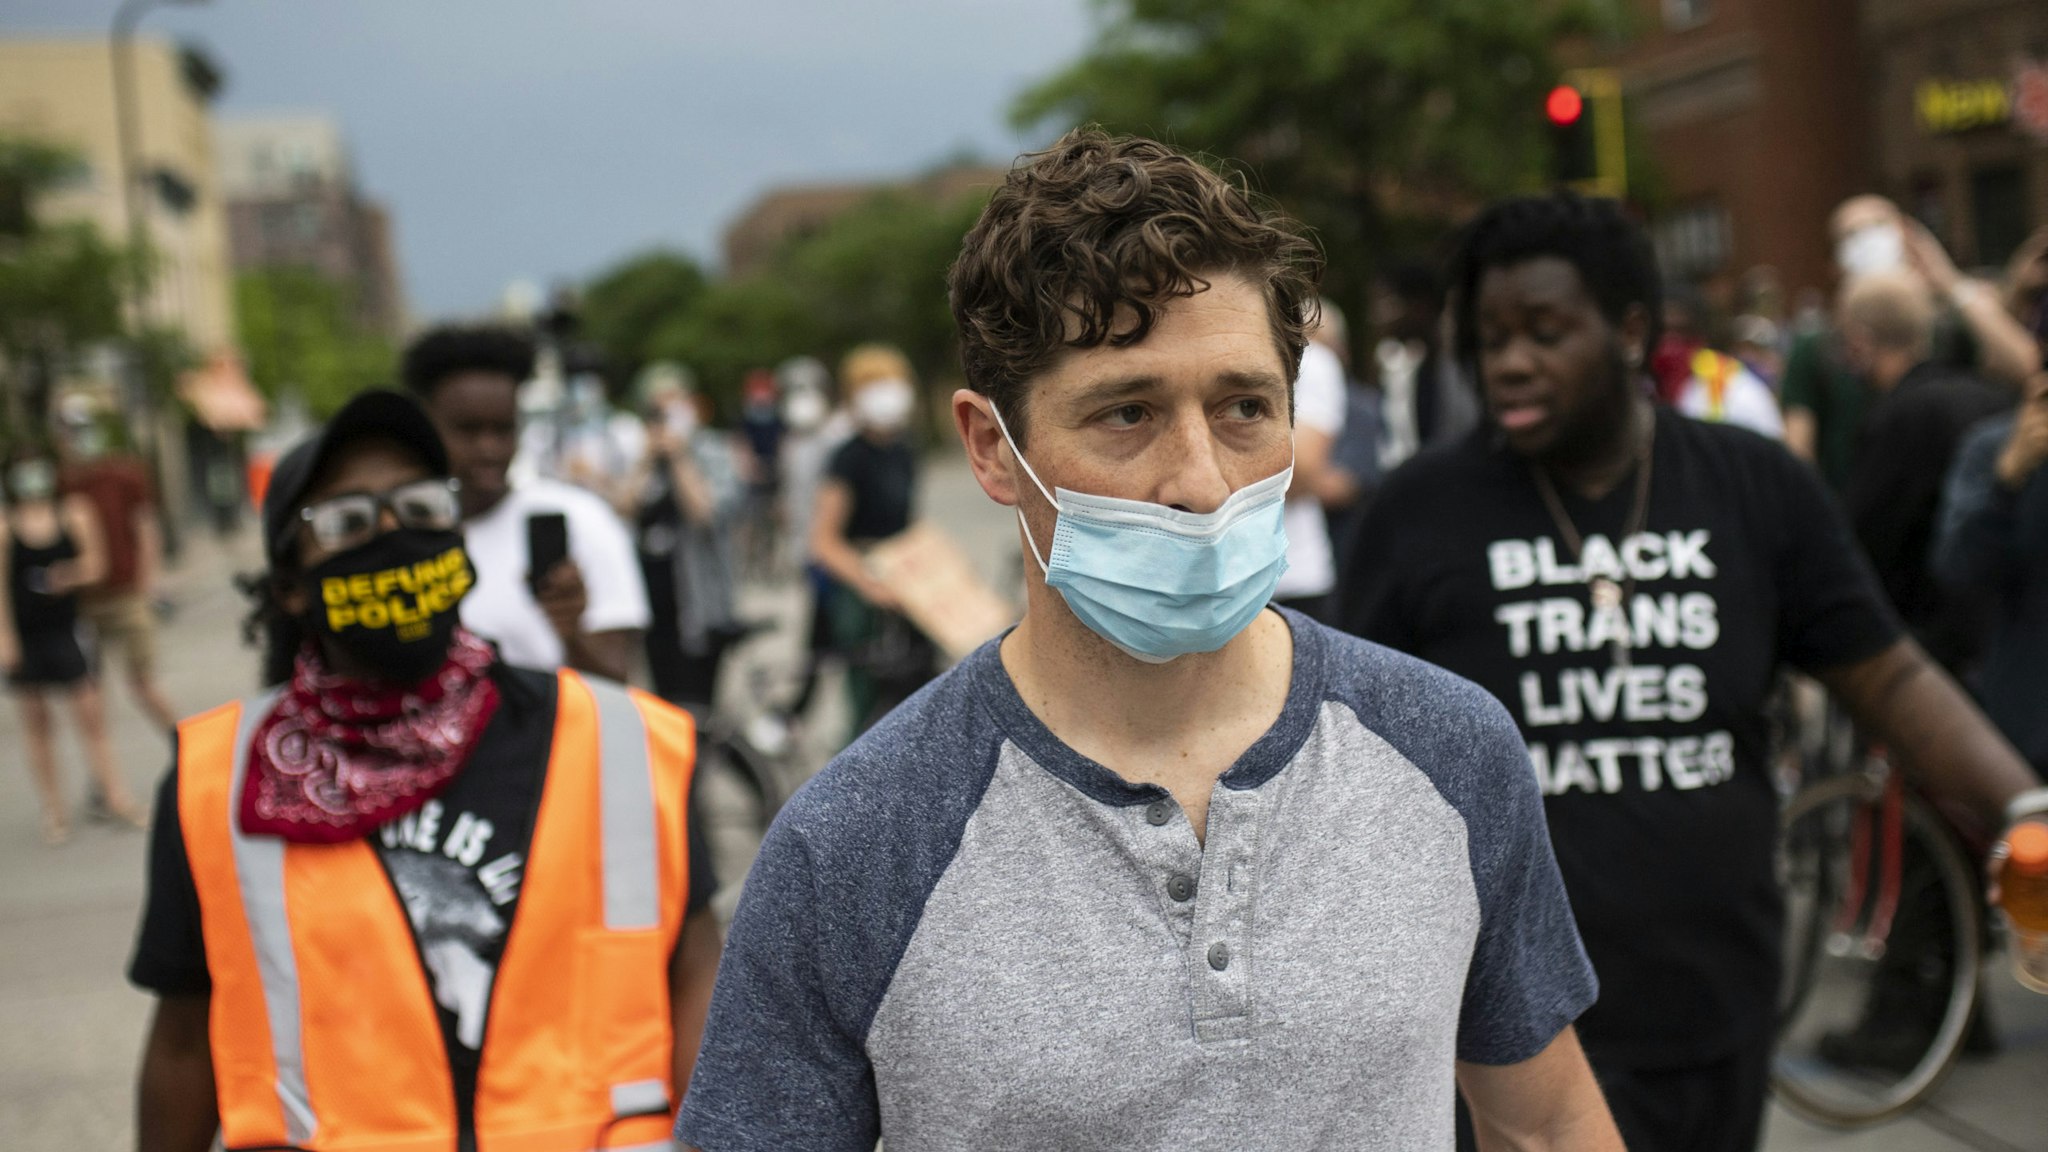 MINNEAPOLIS, MN - JUNE 6: Minneapolis Mayor Jacob Frey looks over a demonstration calling for the Minneapolis Police Department to be defunded on June 6, 2020 in Minneapolis, Minnesota. Mayor Frey spoke at the head of the march but was asked to leave by the organizers after declining to commit to fully defunding the MPD. (Photo by Stephen Maturen/Getty Images)